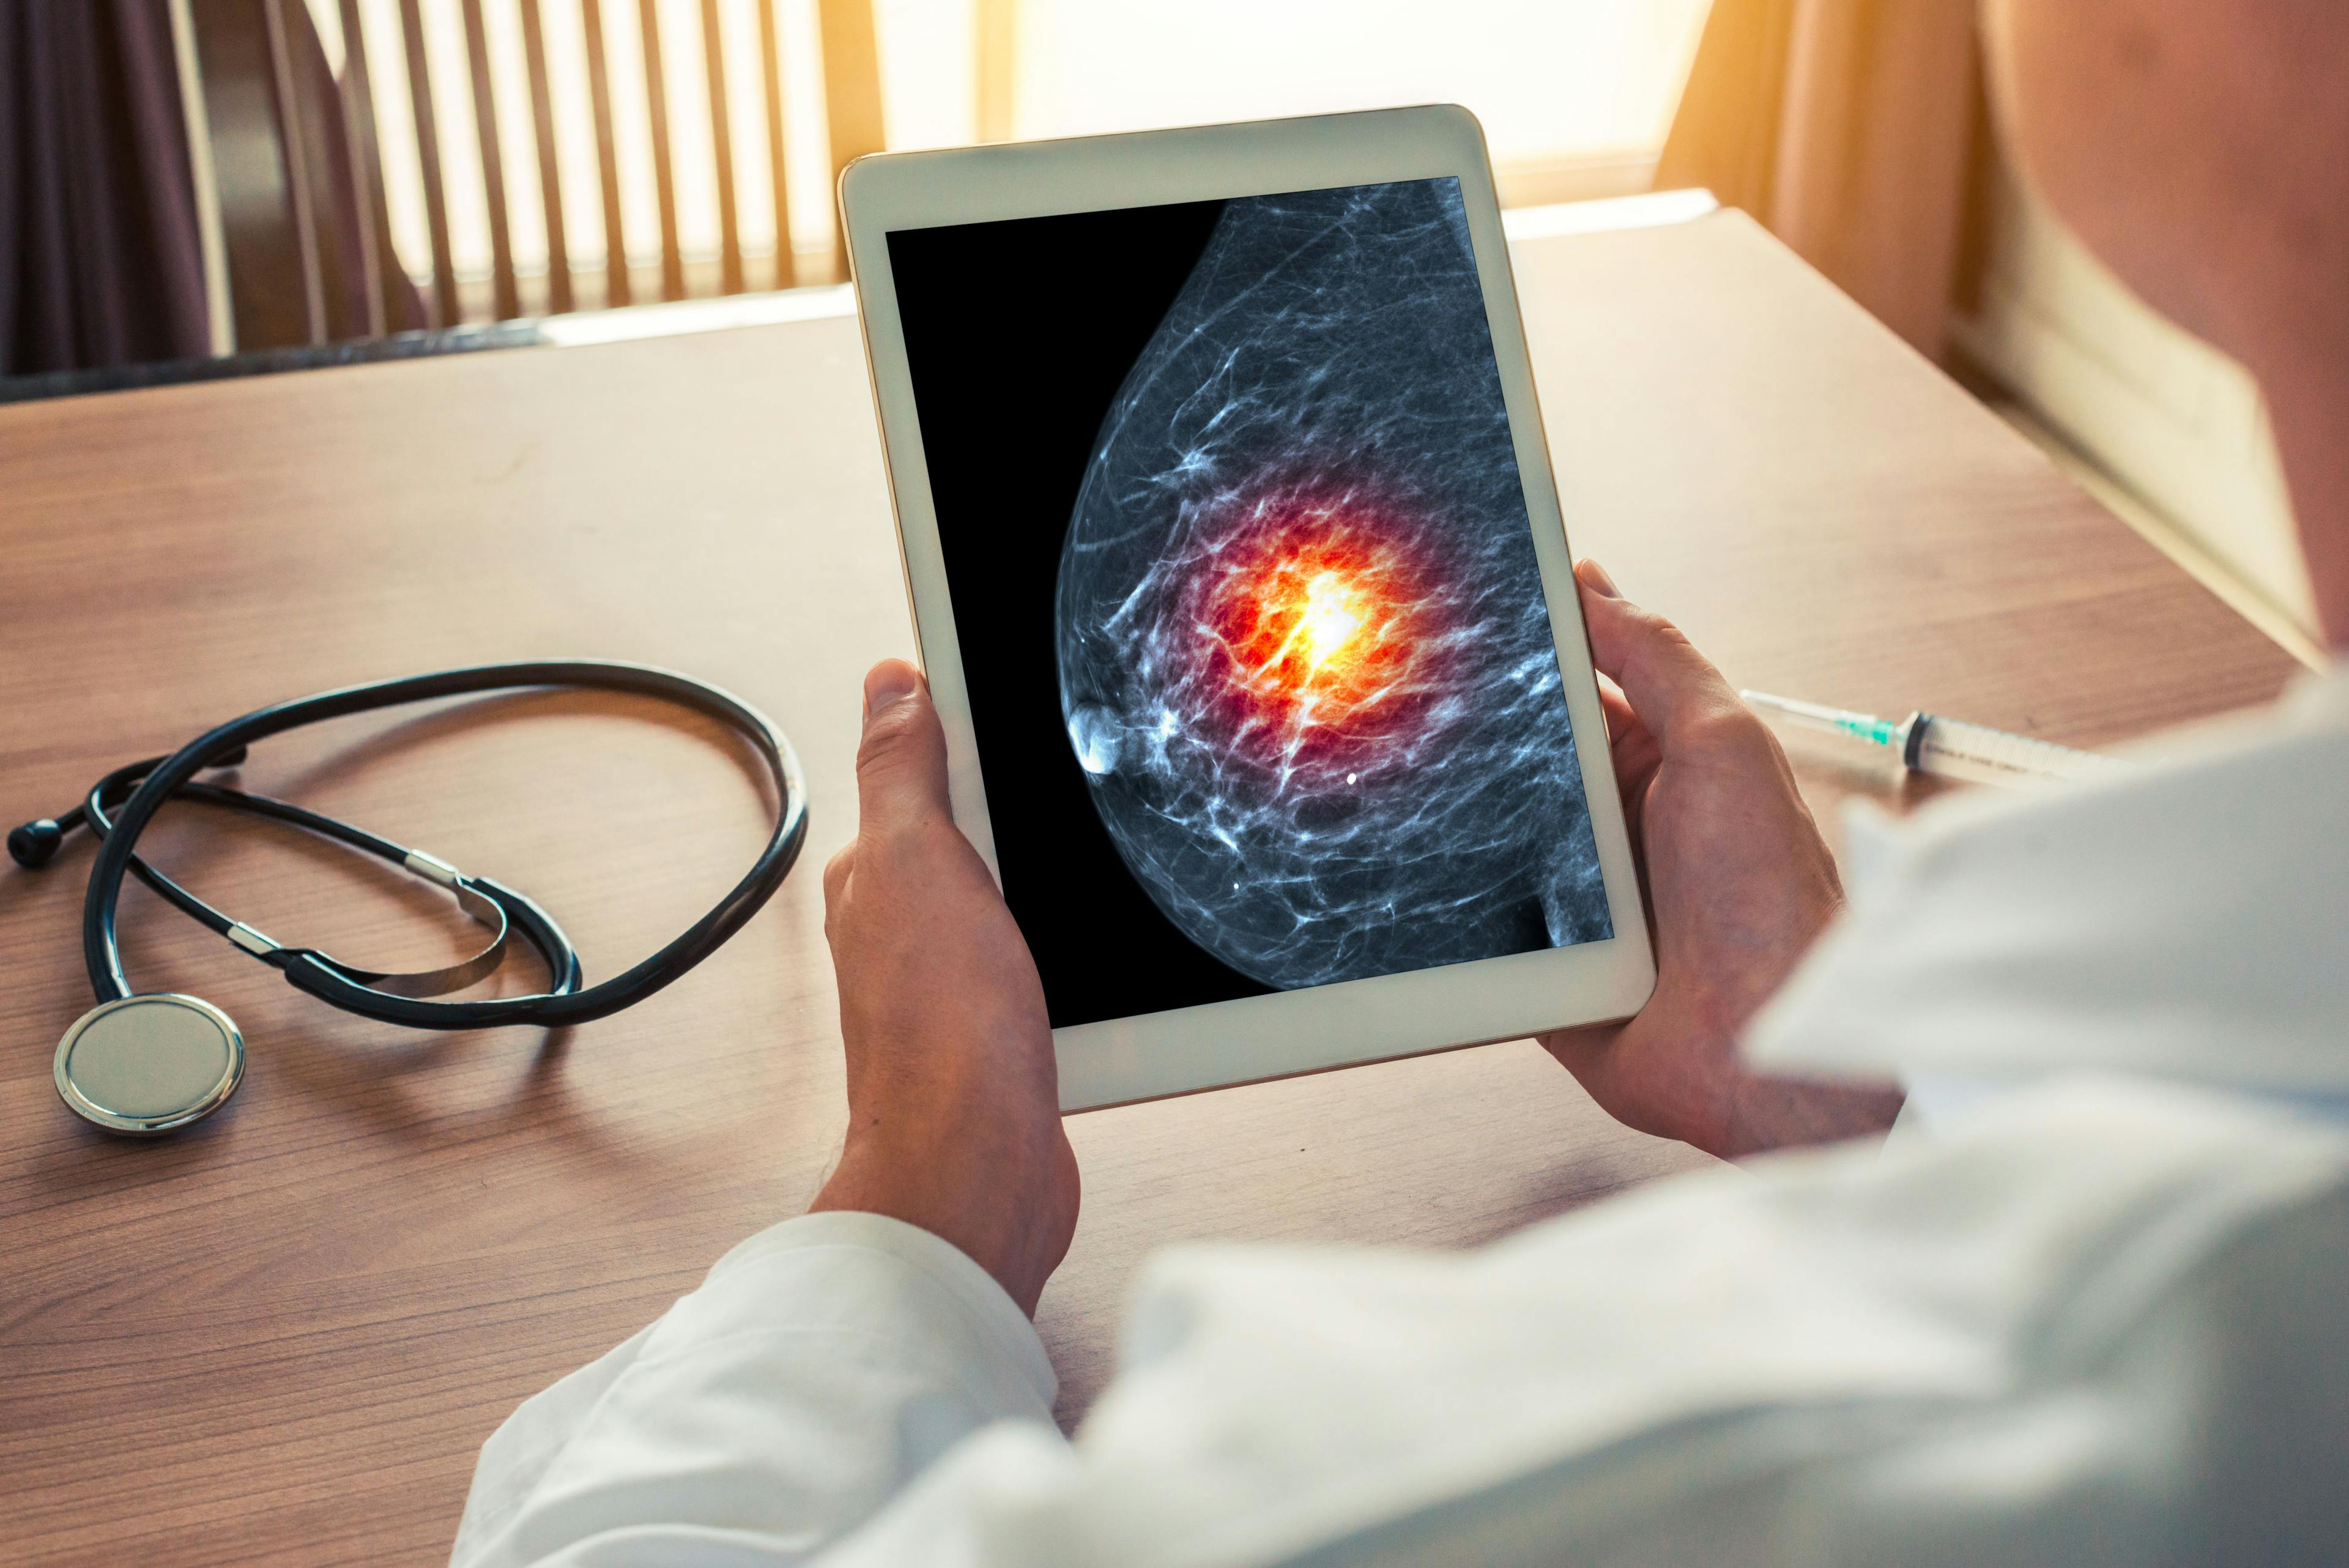 Breast cancer diagnosis during and before pandemic